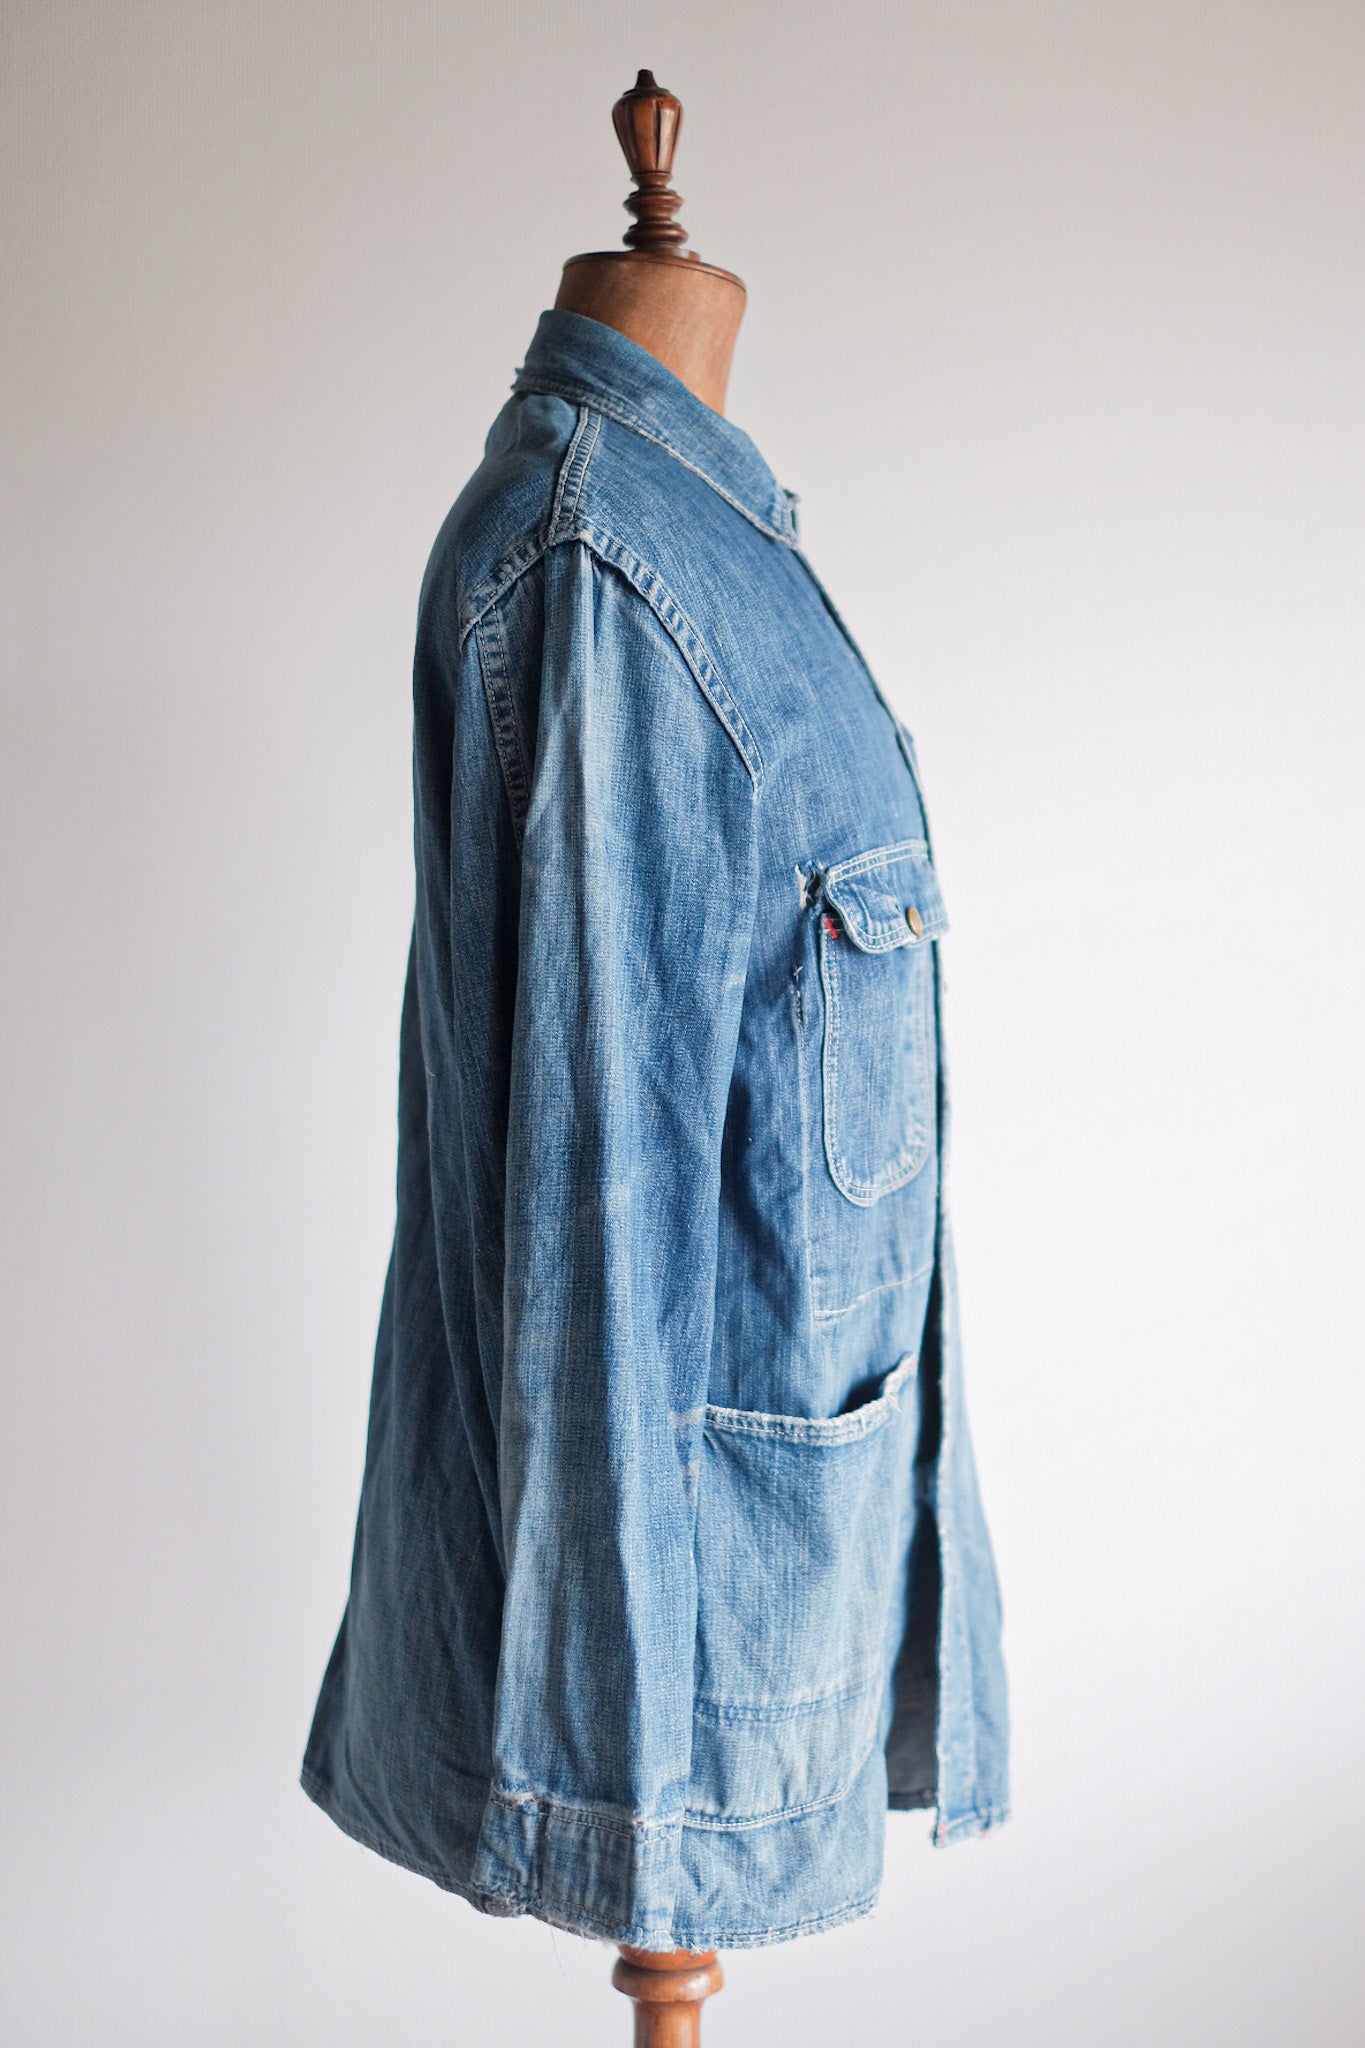 [~ 40's] American Vintage Denim Coverall "Test by Rice-Stix"